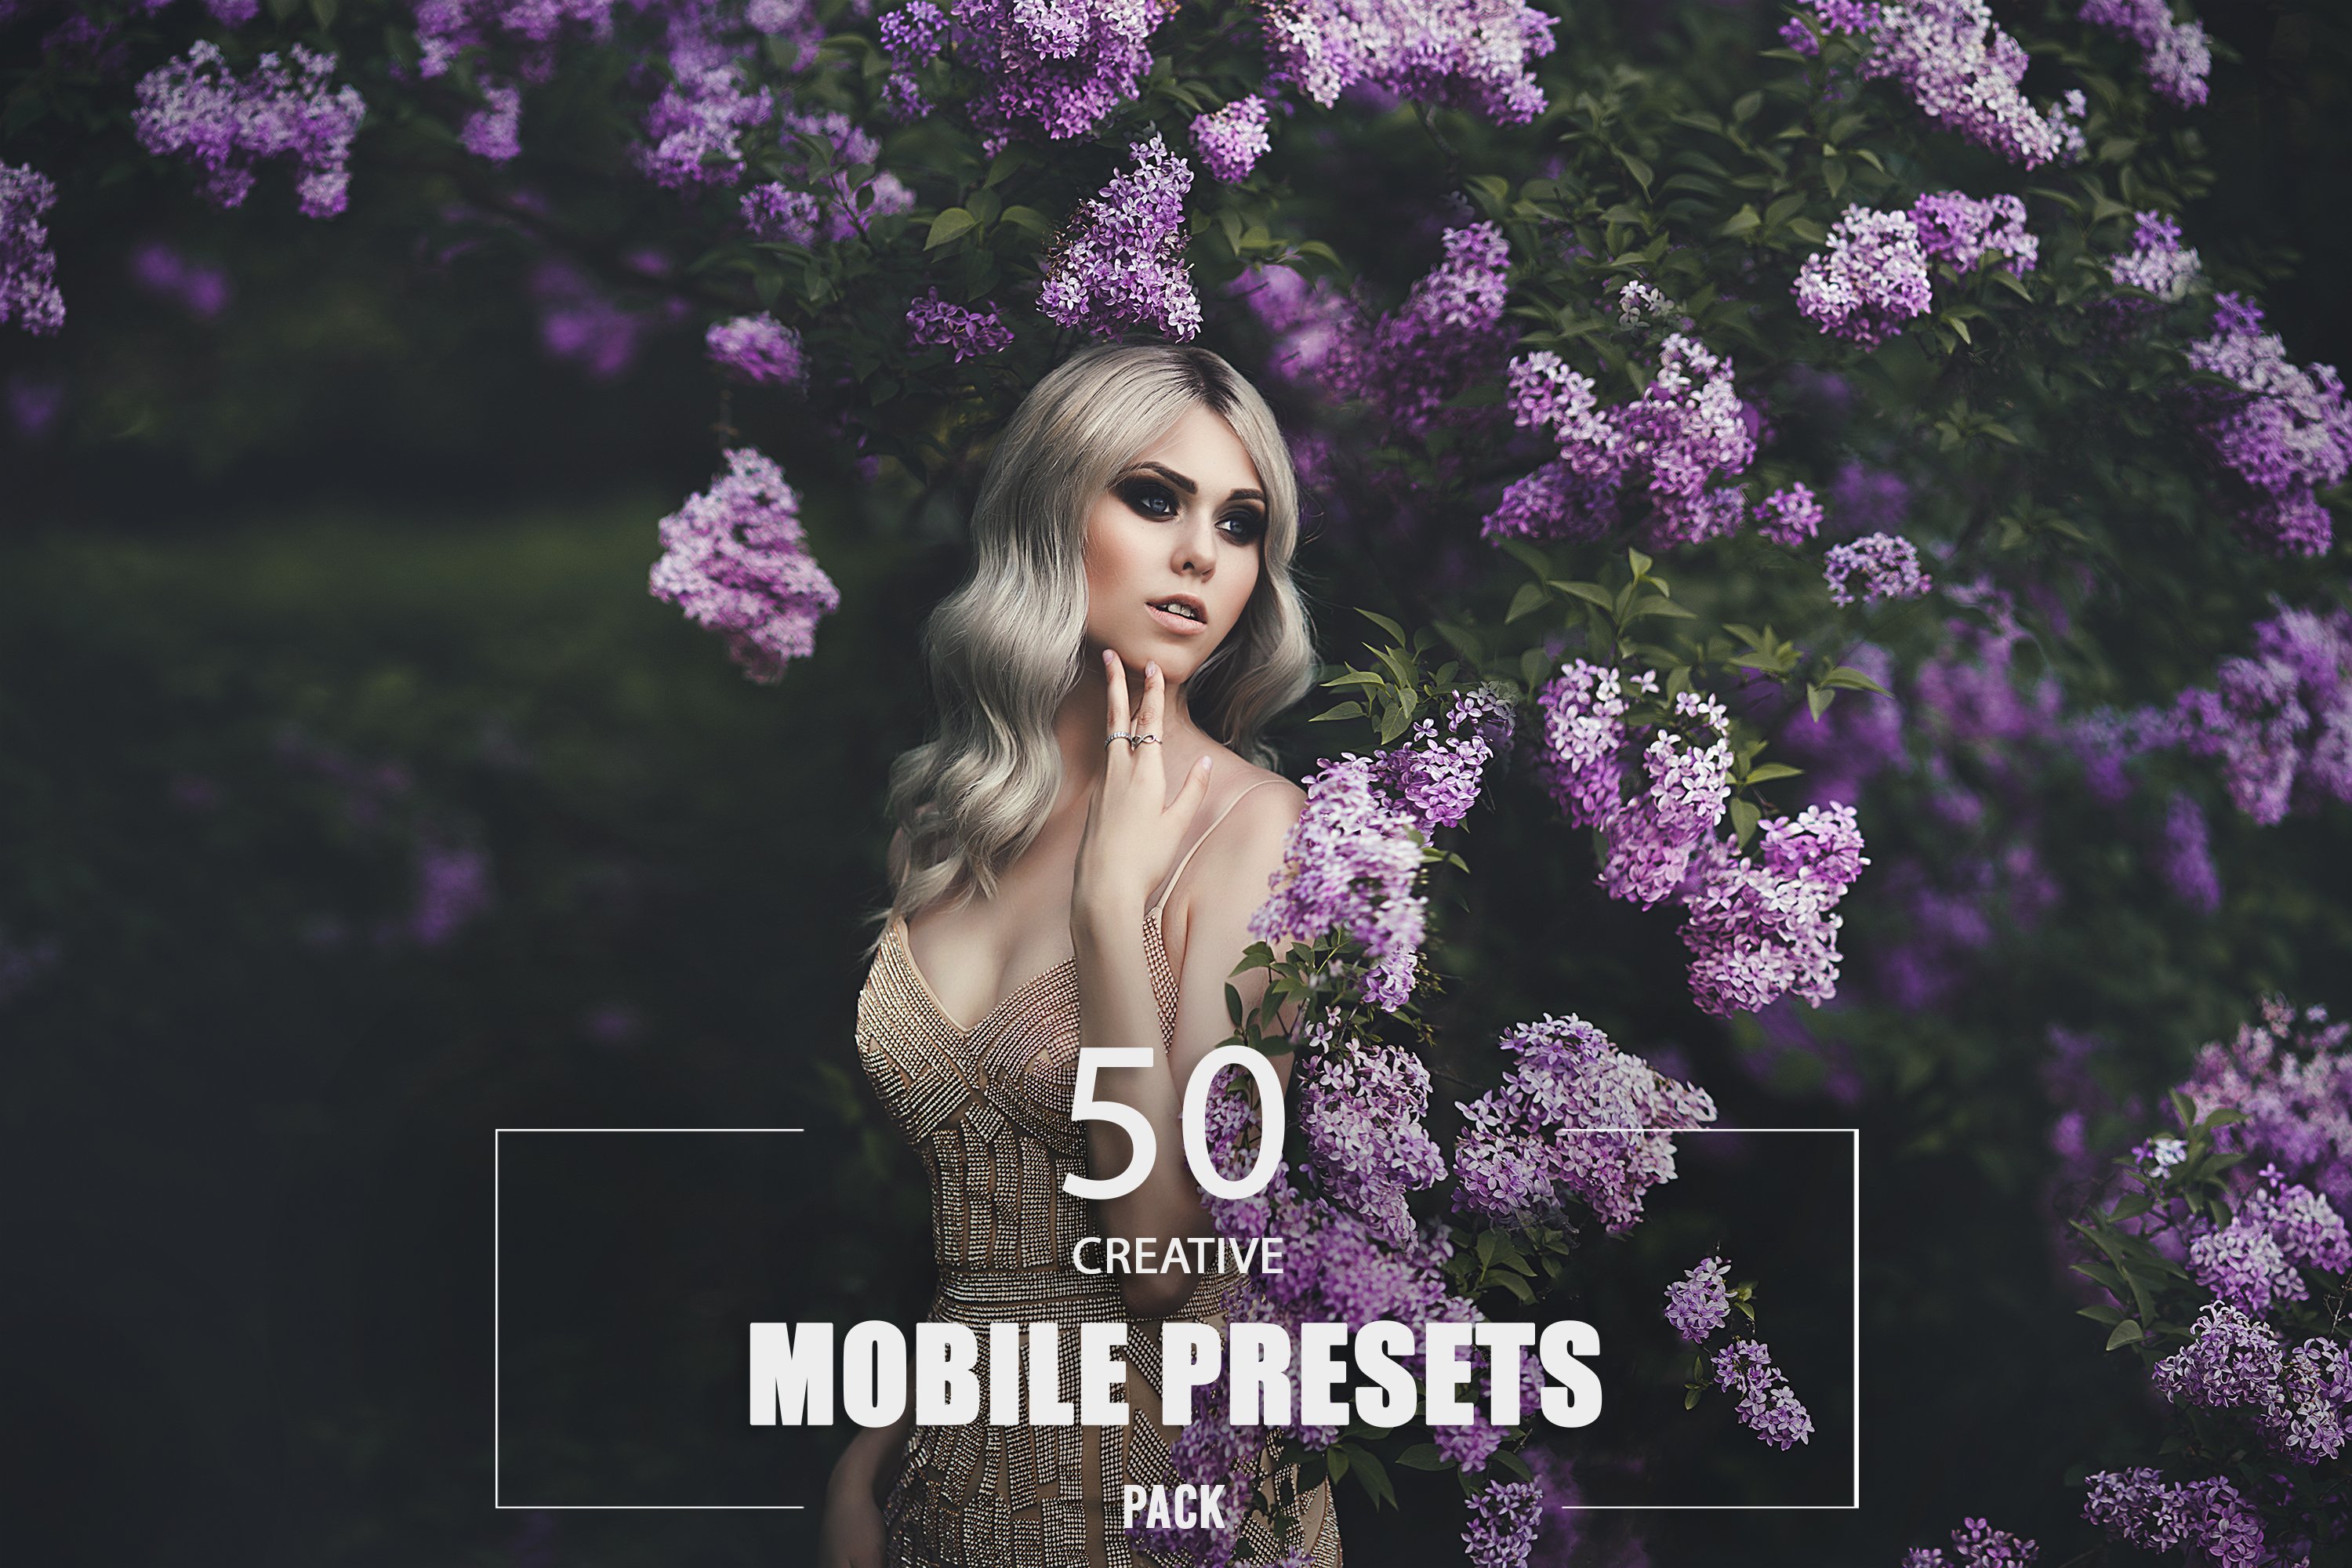 50 Creative Mobile Presets Packcover image.